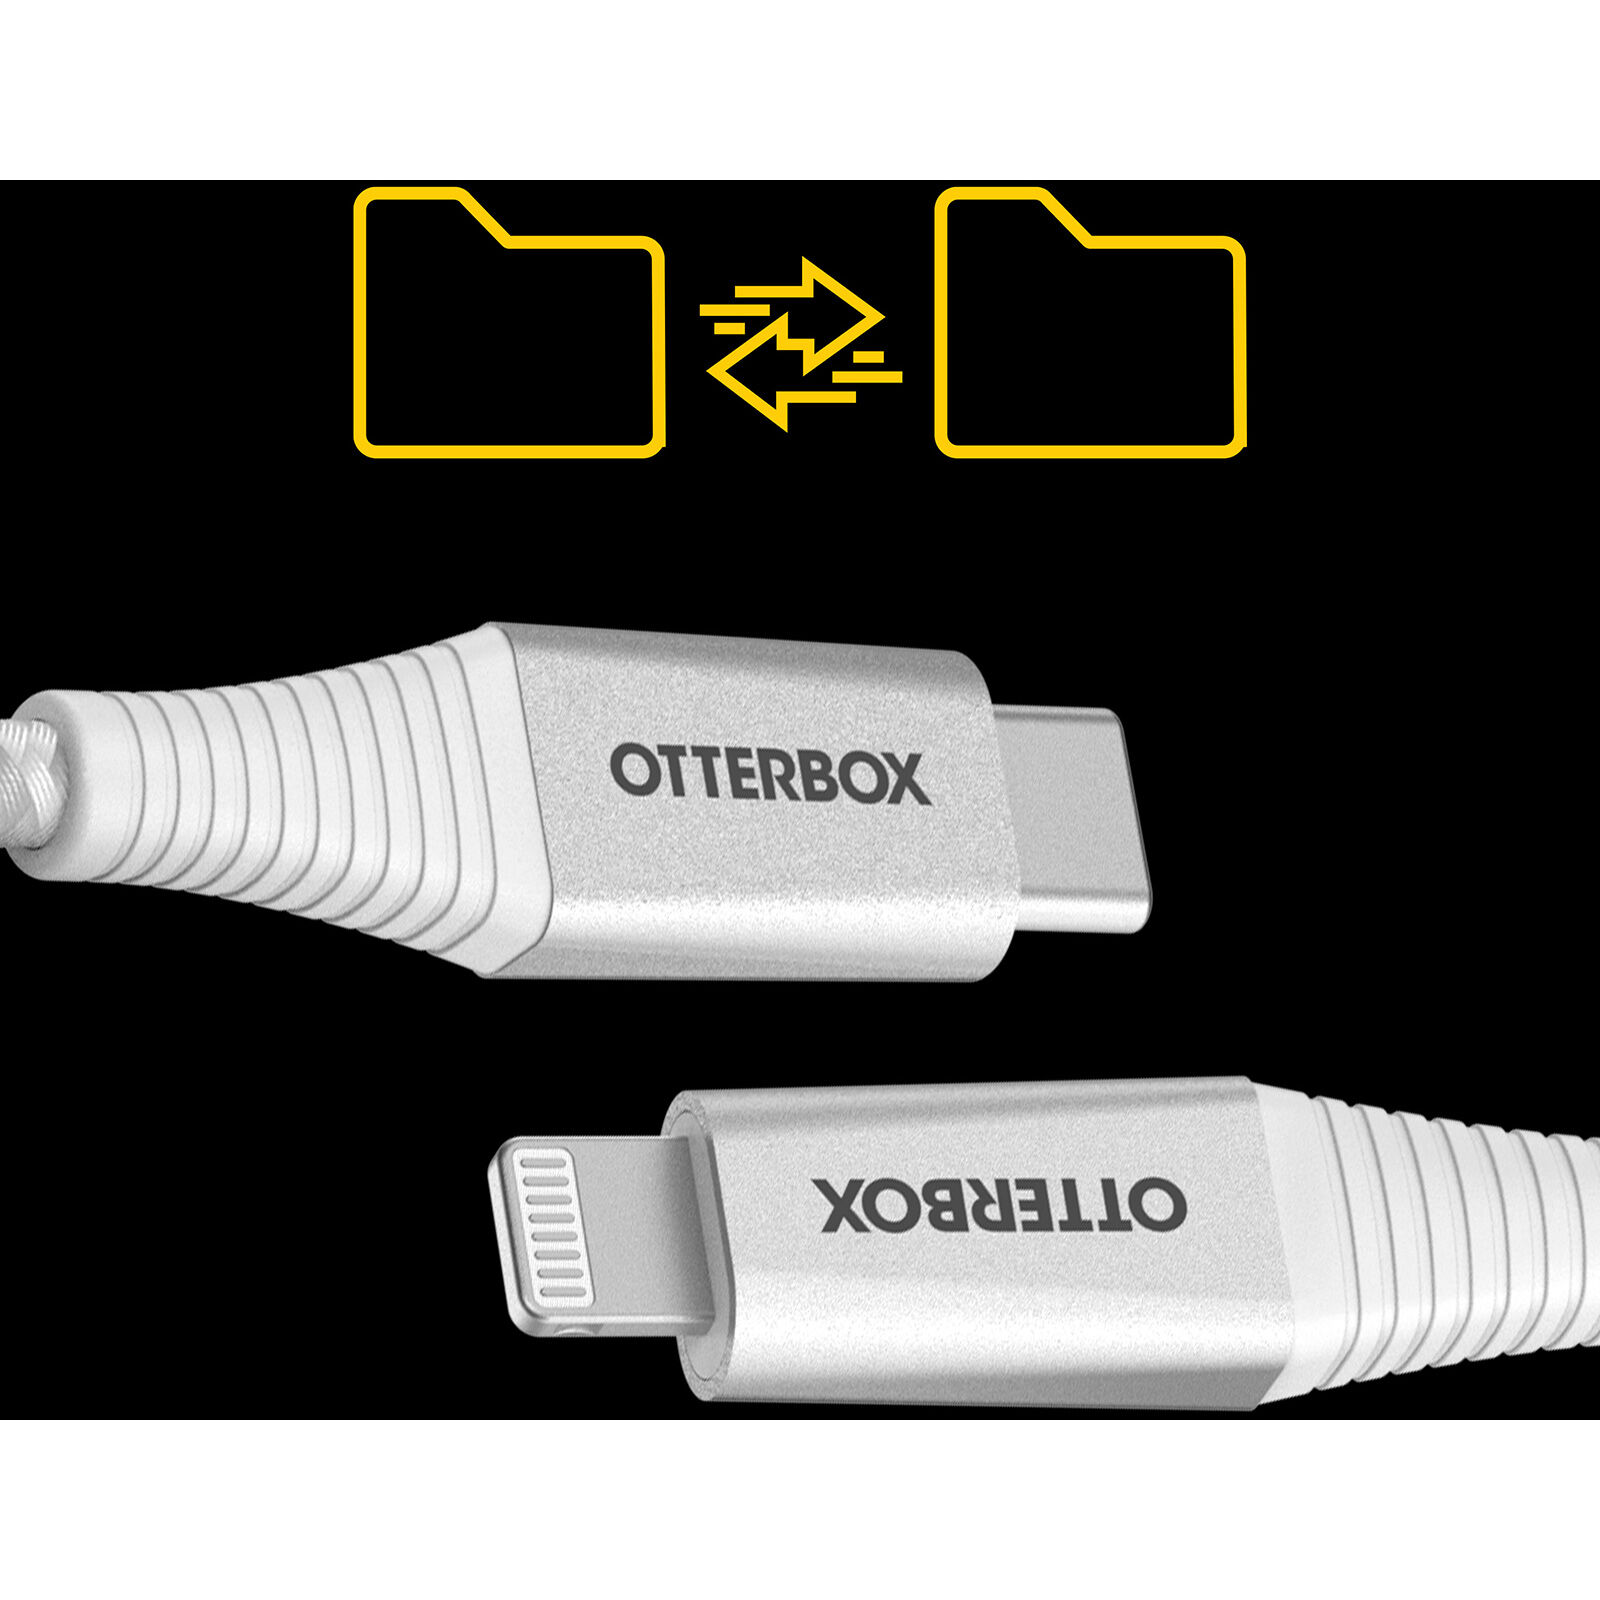 OtterBox Lightning to USB-C Fast Charge Premium Pro Cable (2M) – White (78-80891), 3 AMPS (60W), MFi, 30K Bend/Flex,Braided, Apple iPhone/iPad/MacBook